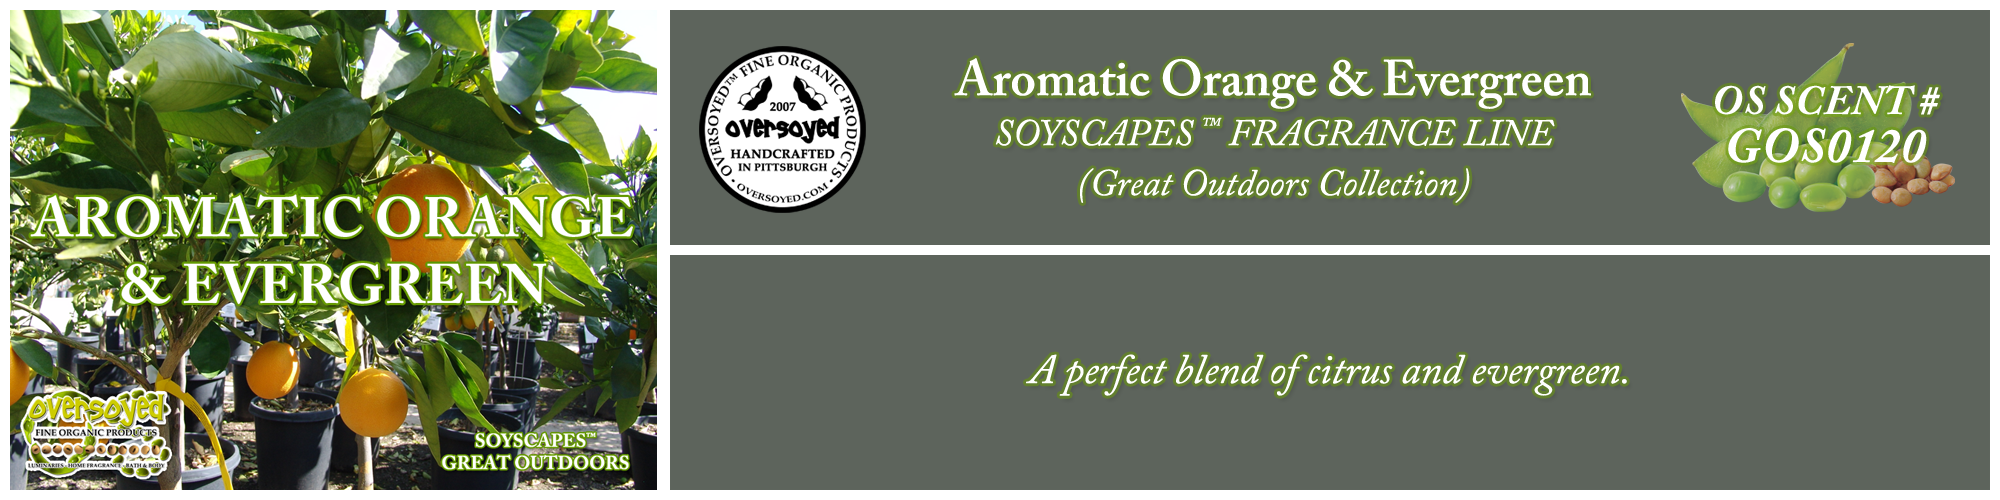 Aromatic Orange & Evergreen Handcrafted Products Collection